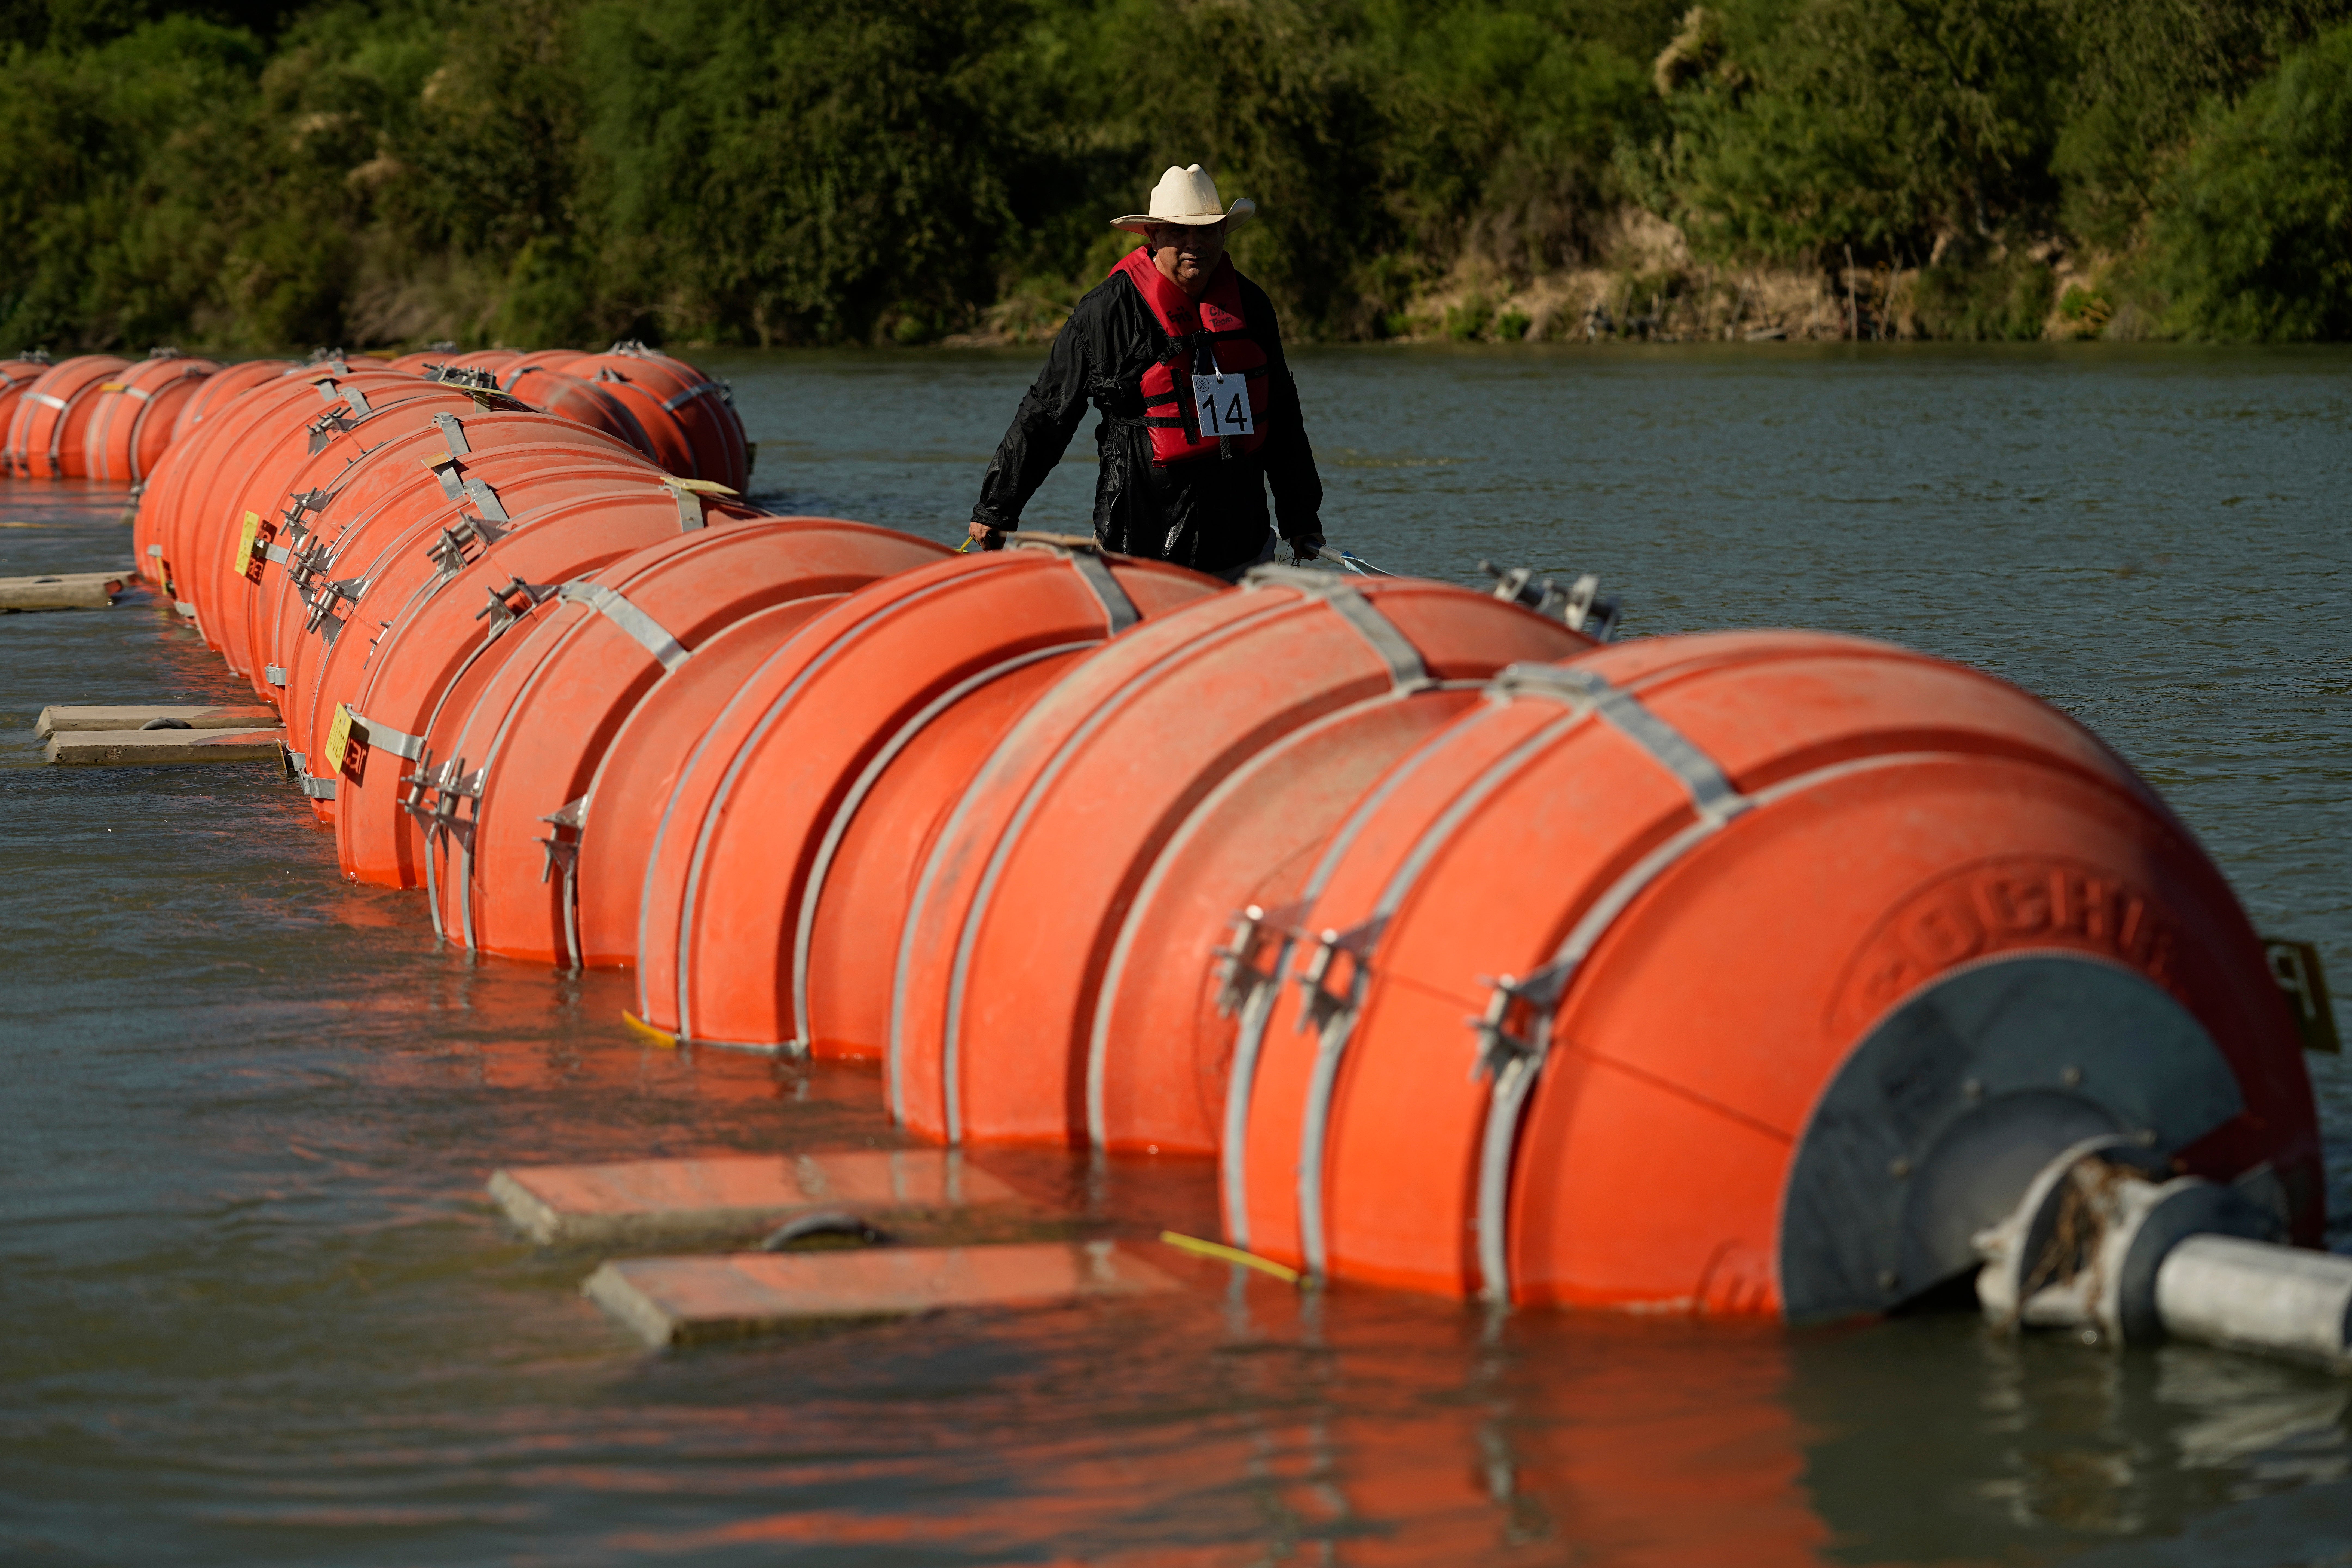 A judge has ordered Texas to remove floating buoys in the Rio Grande